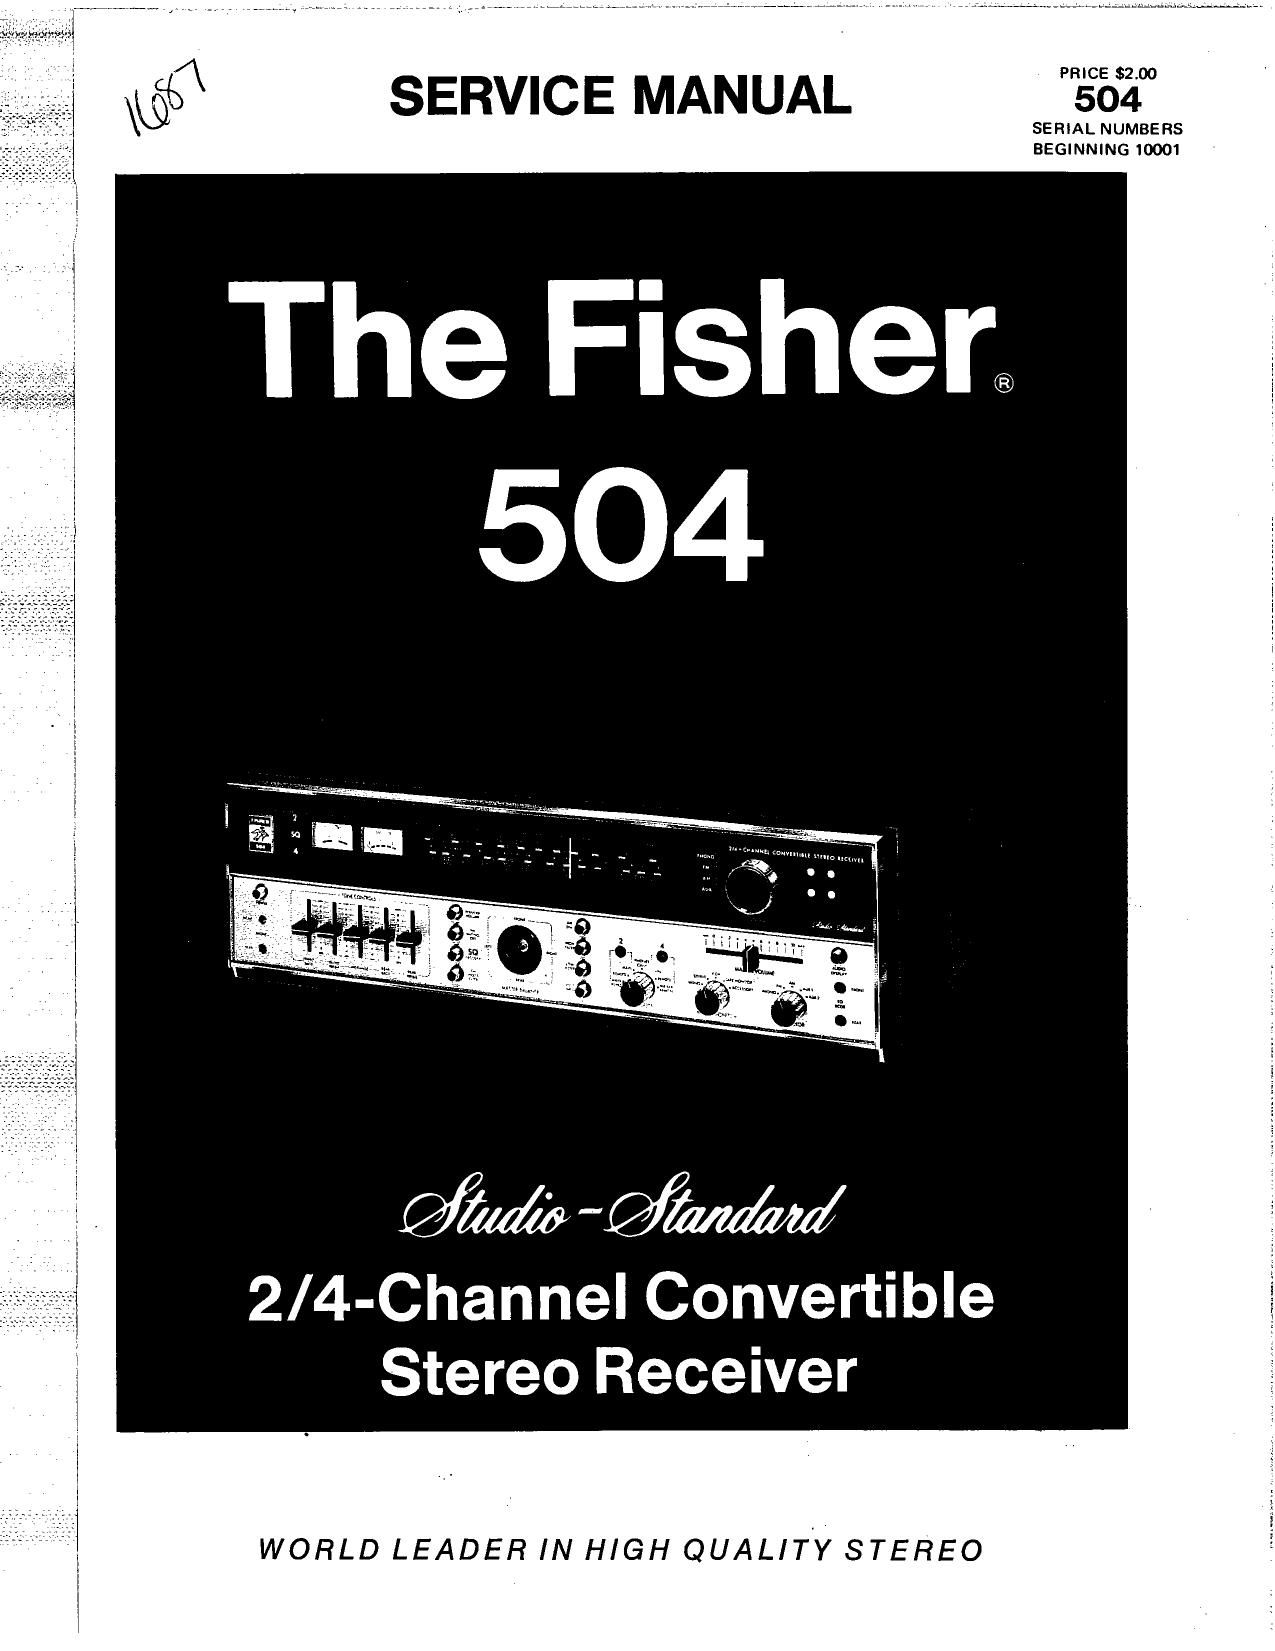 Fisher 504 Service Manual